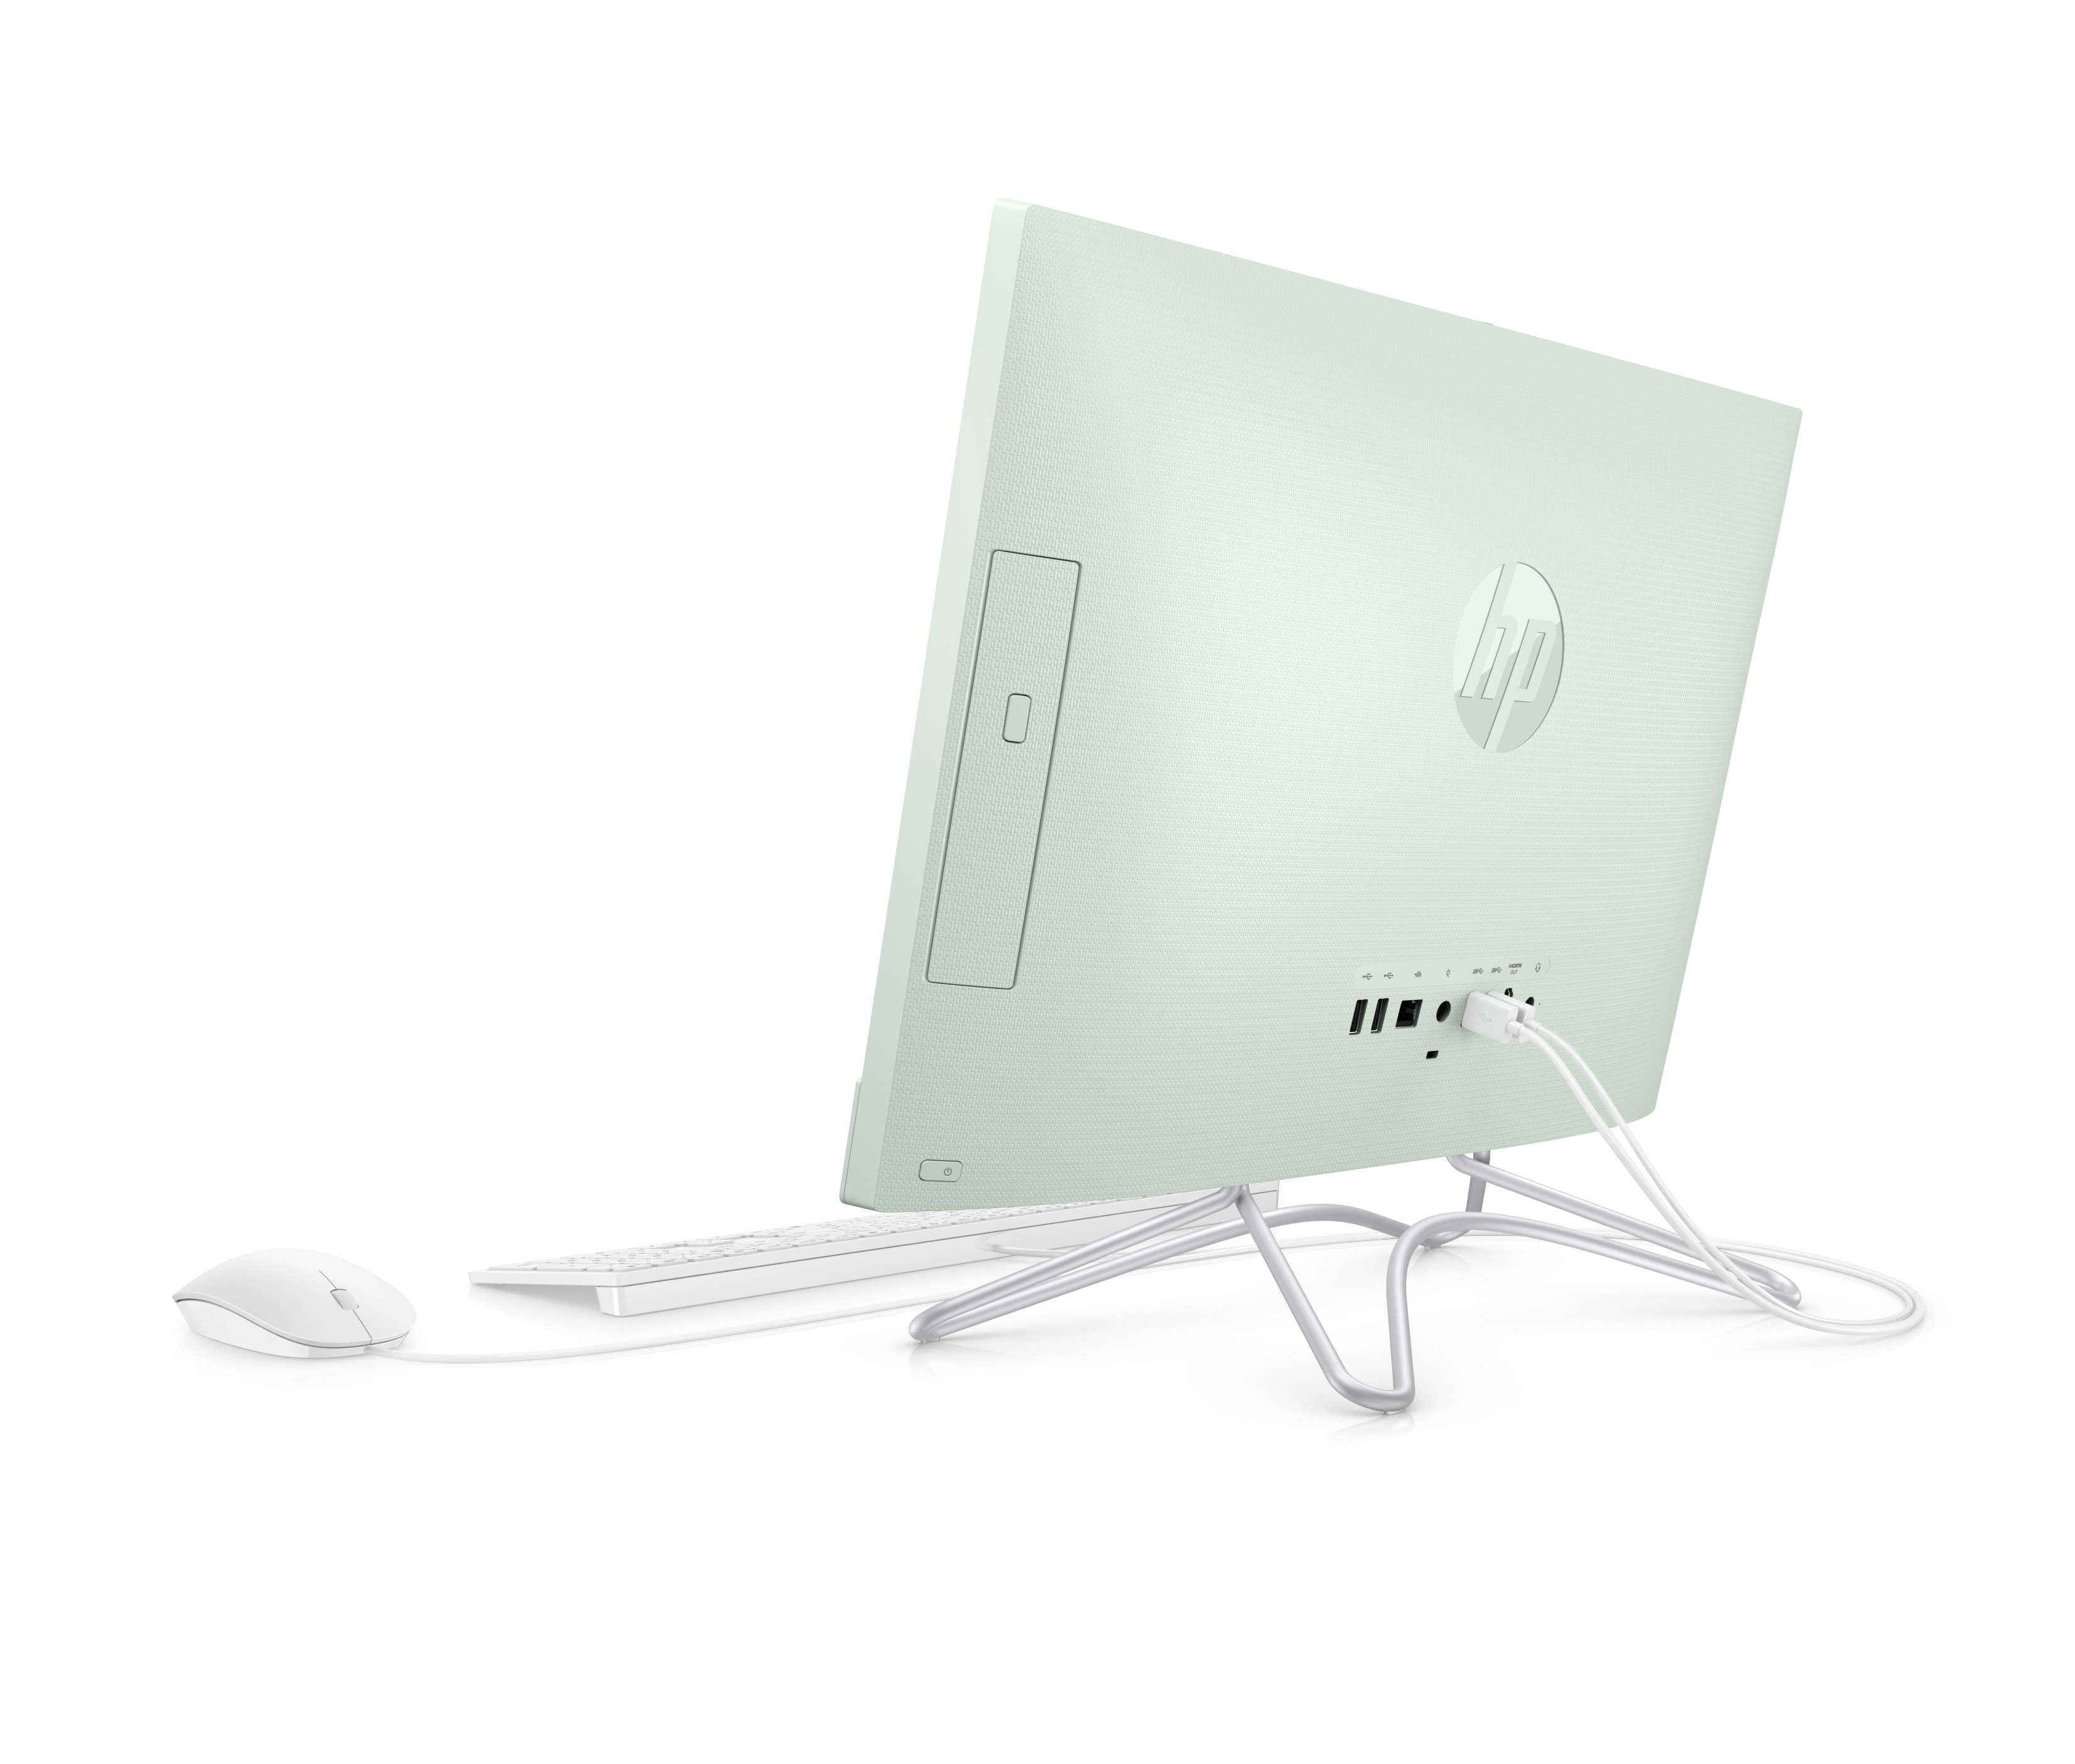 HP 22-c0073w All-in-One PC, 22" Display, Intel Celeron G4900T 2.9 GHz, 4GB RAM, 1TB HDD - image 4 of 5